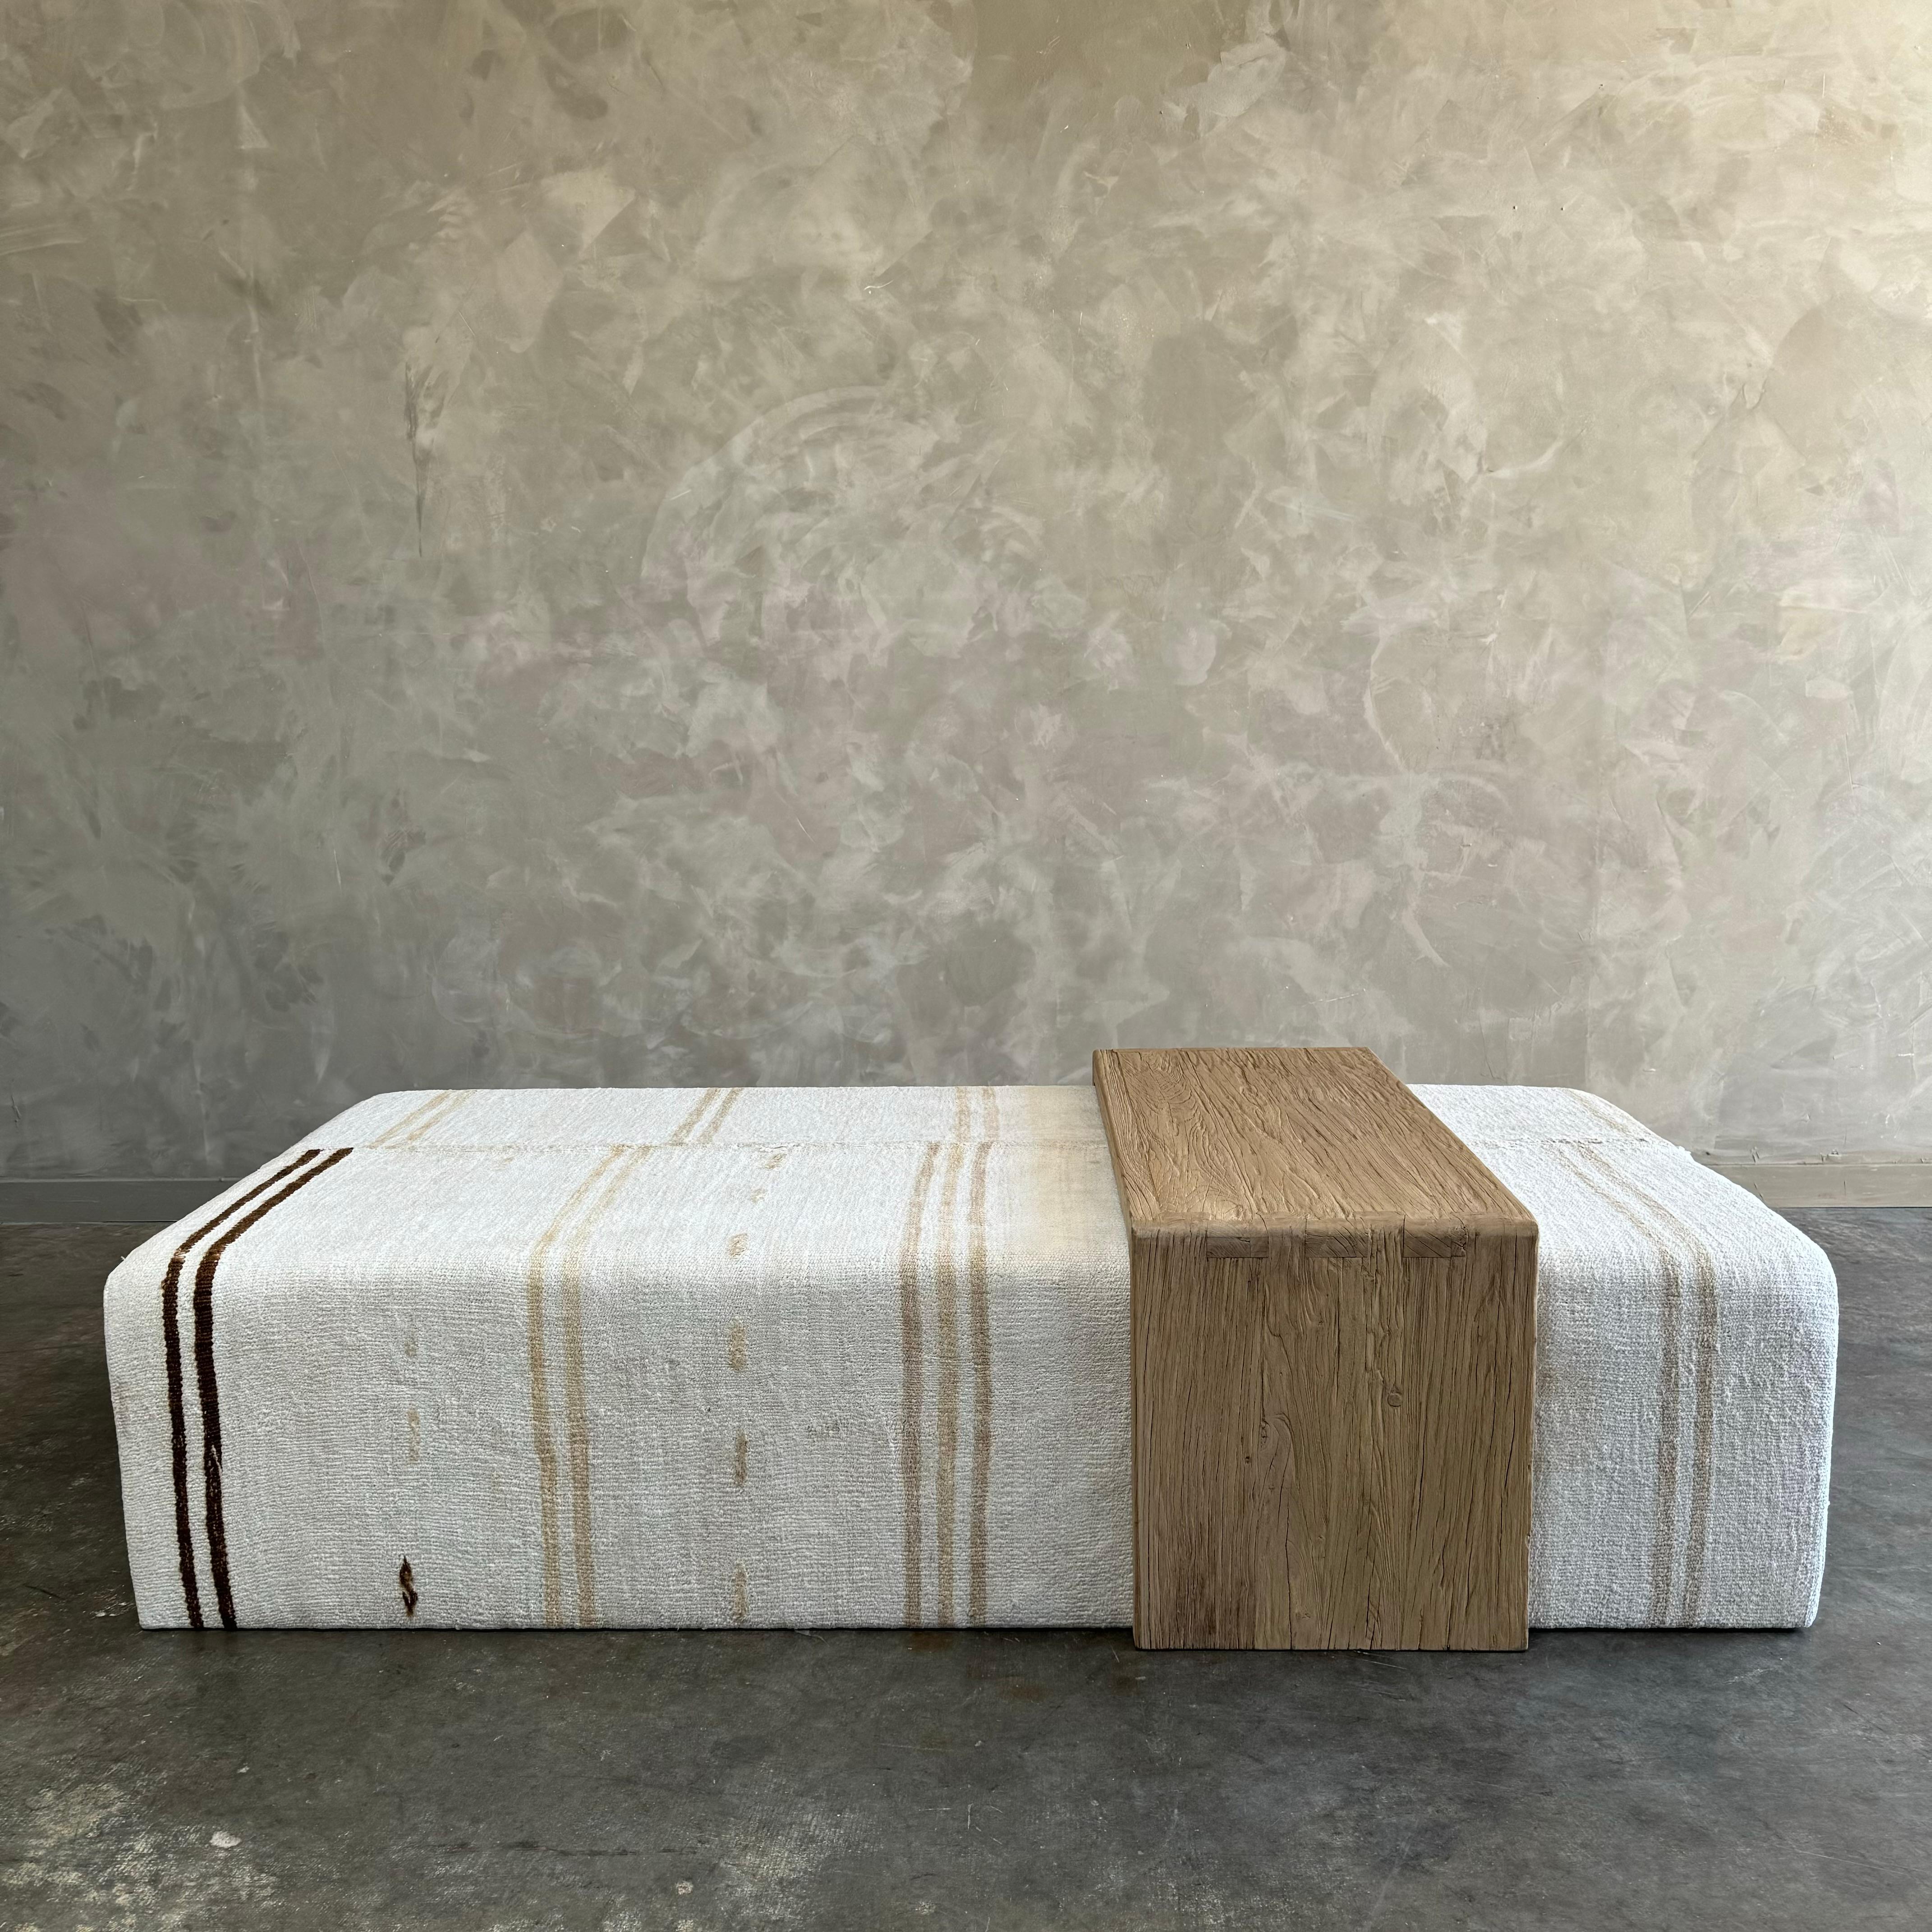 Our cube ottoman is upholstered in a beautiful hemp stripe rug. A light color with flax, dark natural stripes give this a versatile style. The hand-crafted solid elm wood waterfall table has unique characteristics with beautiful grain and